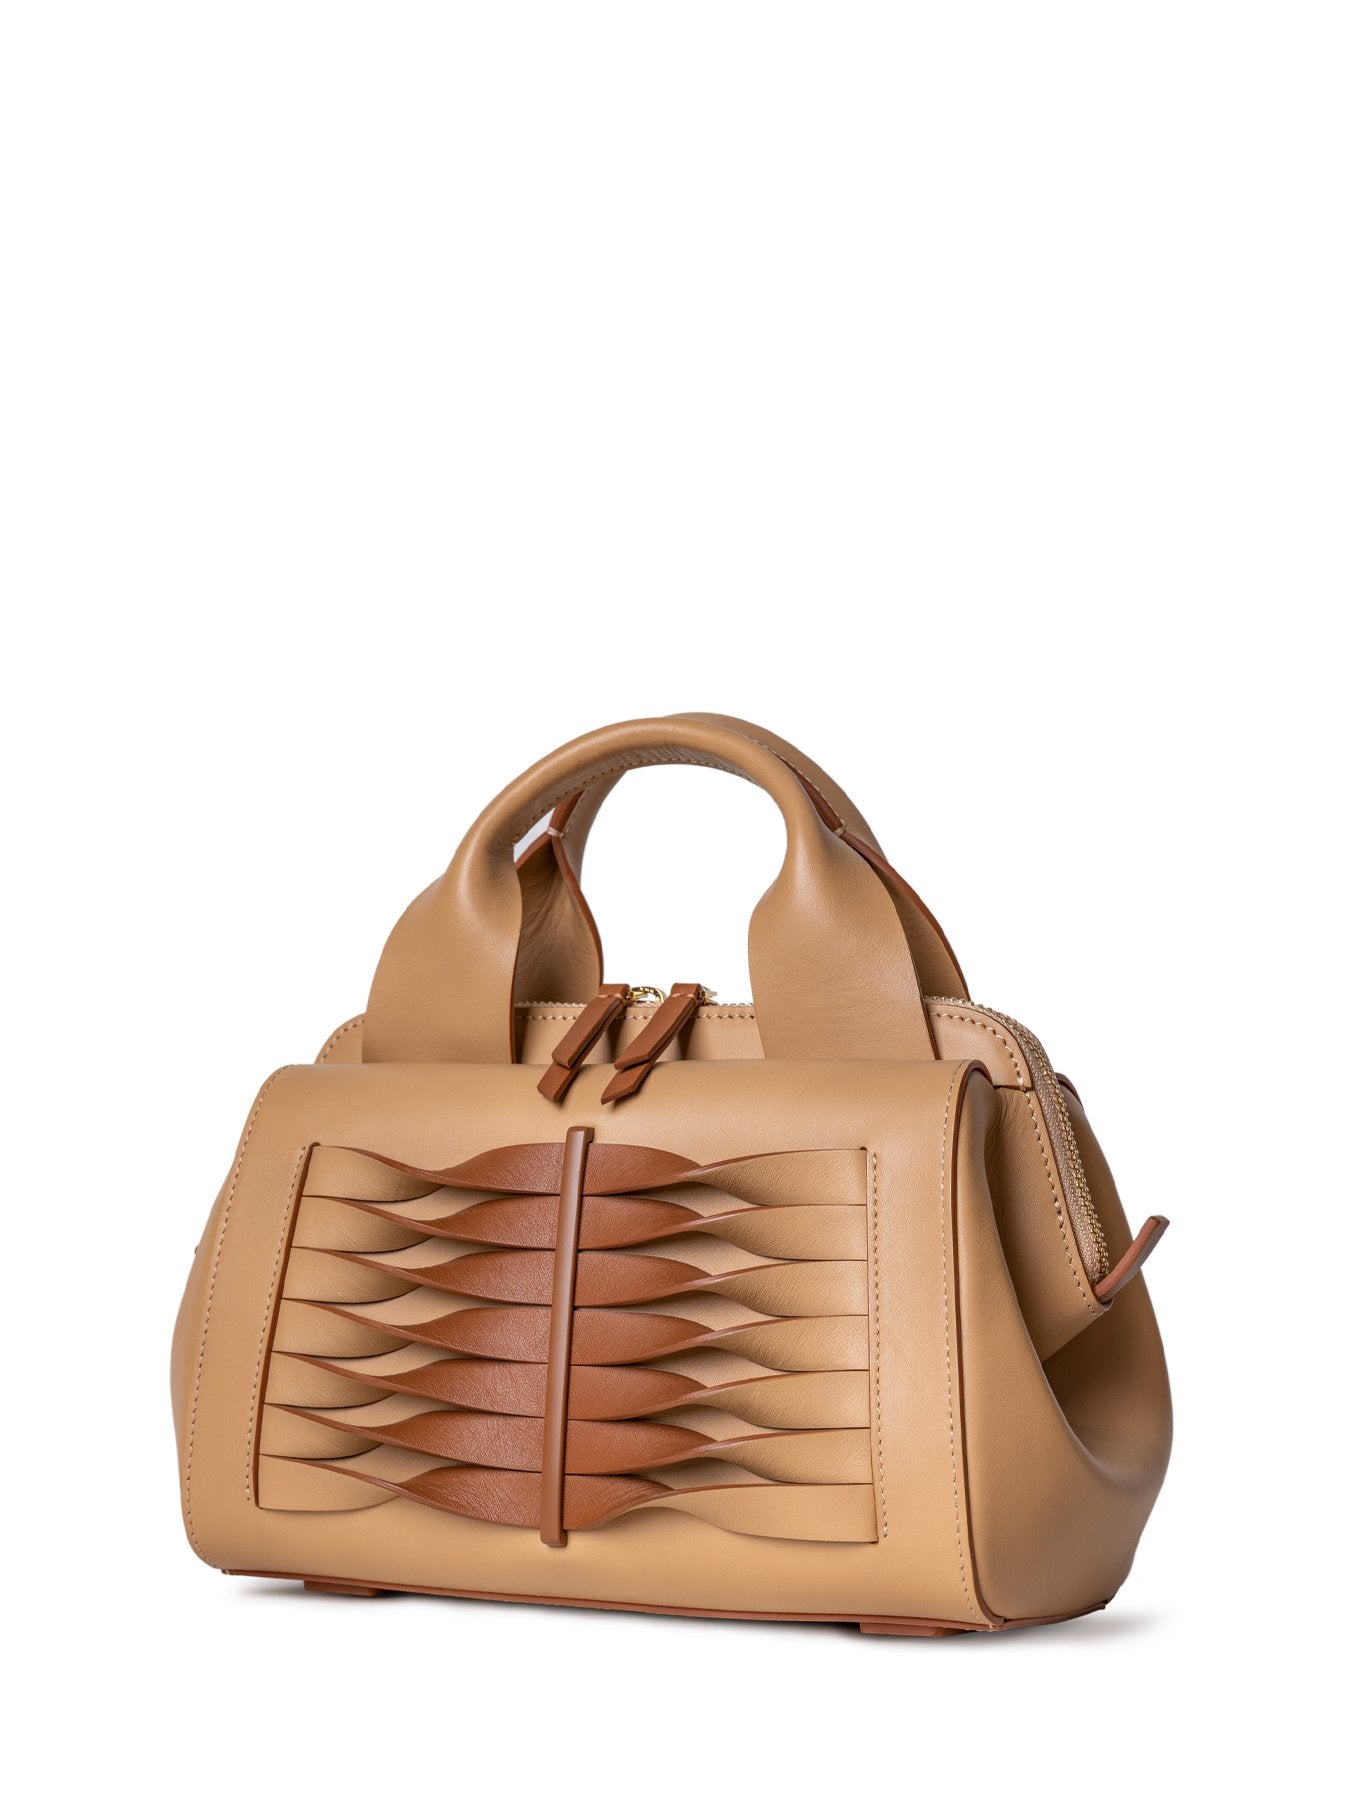 chic and niche handbag in brown